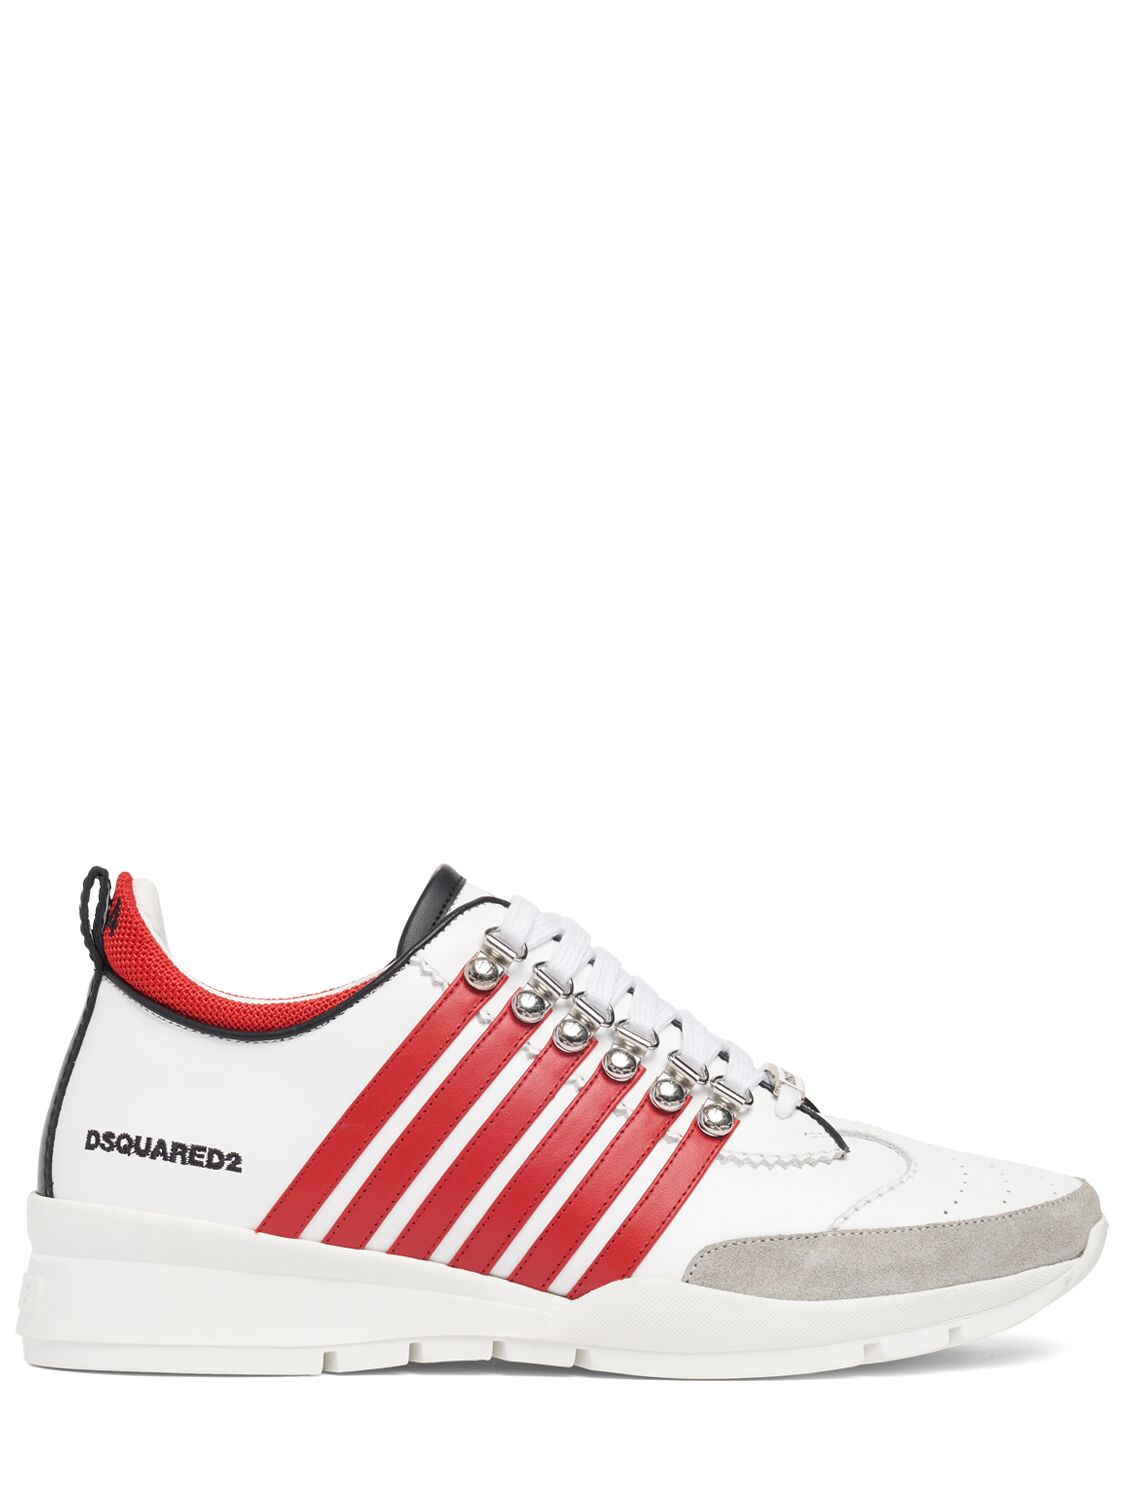 Dsquared2 Logo Leather Sneakers In White,red